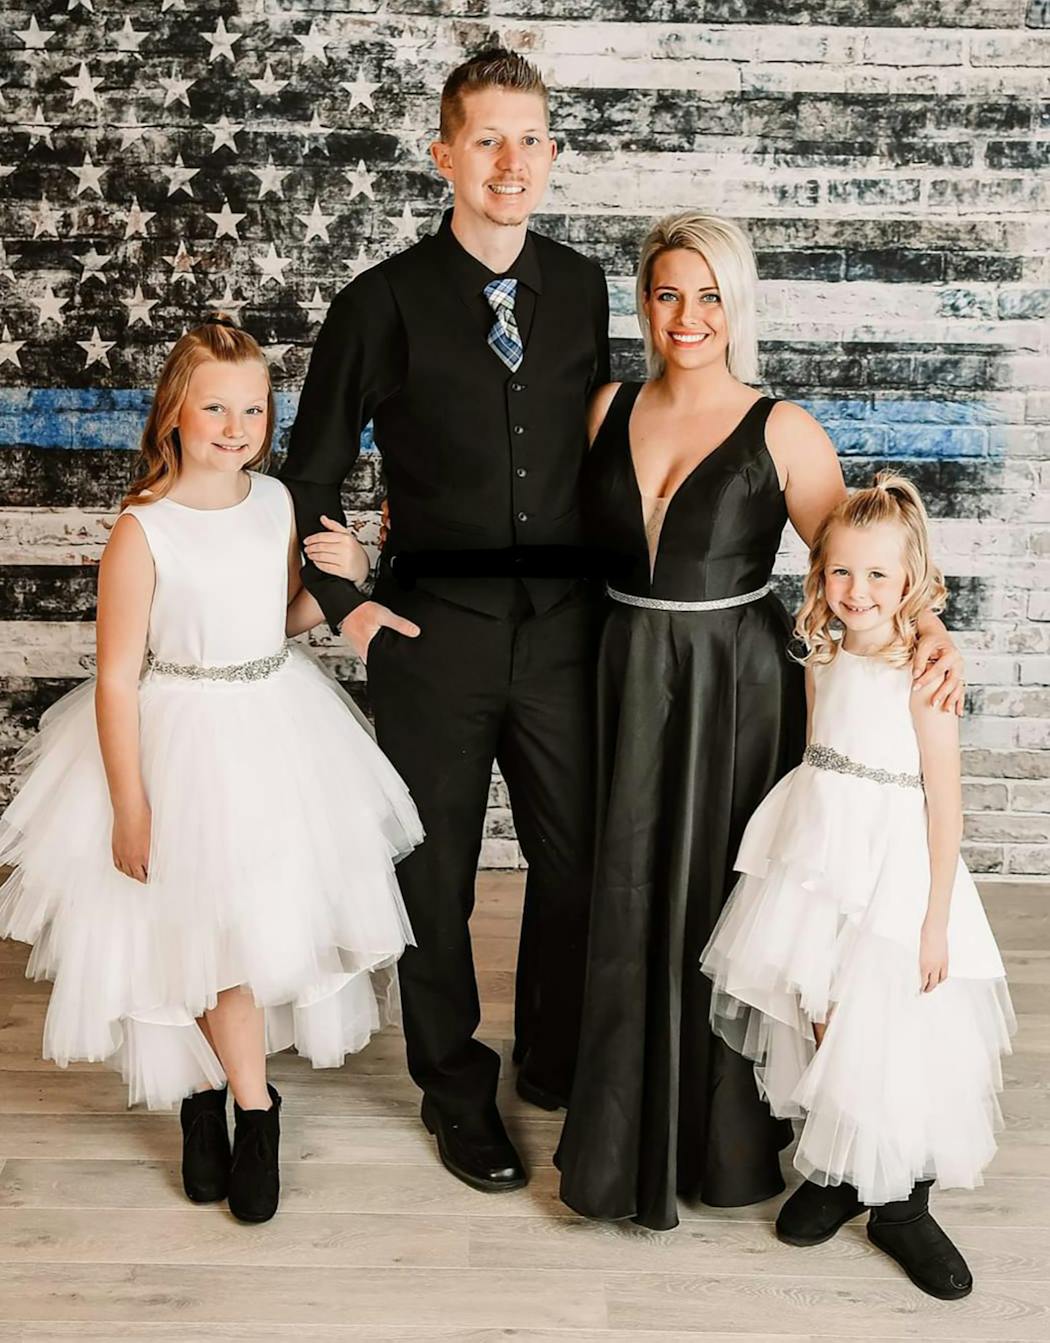 Arik and Megan Matson with their daughters, Audrina, left, and Maklynn.